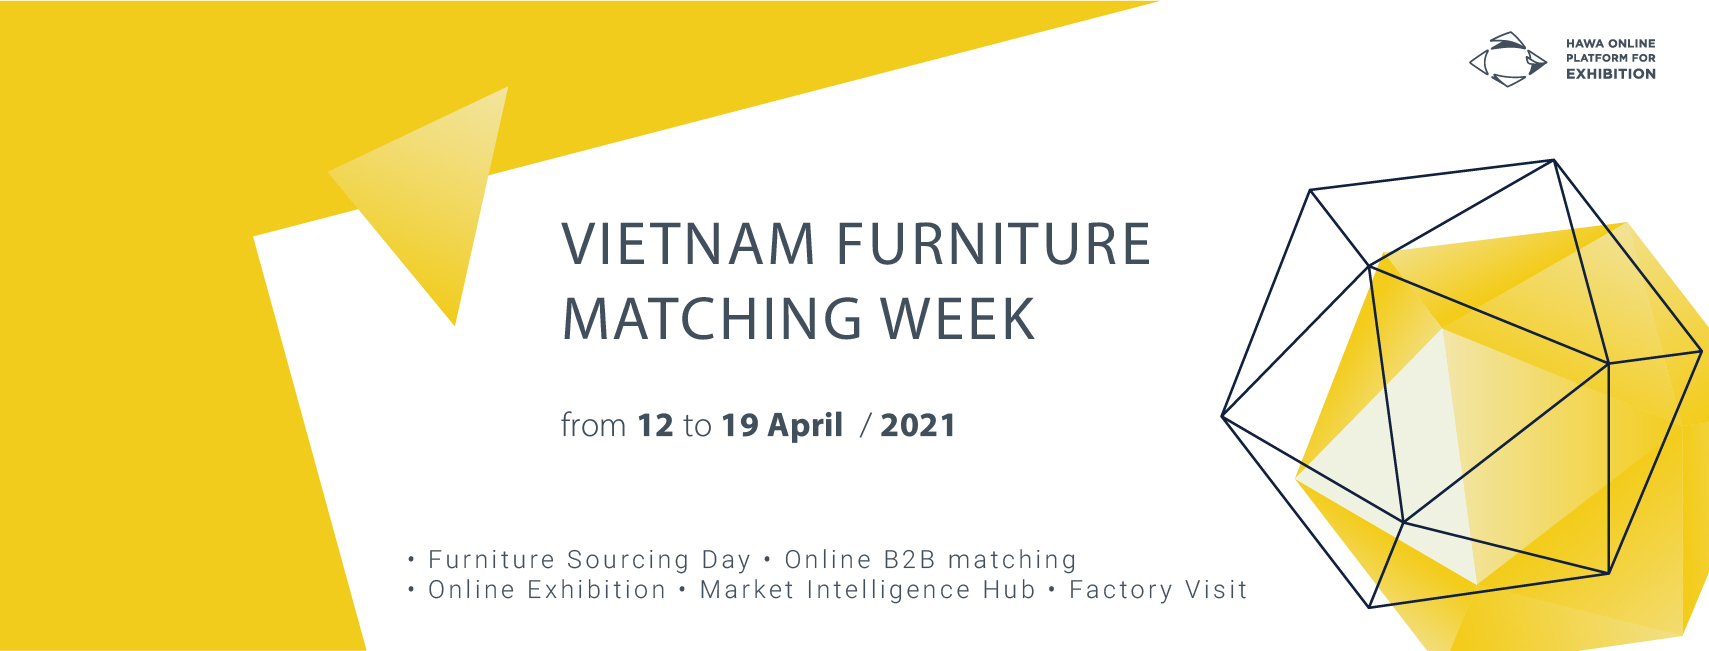 VIETNAM FURNITURE MATCHING WEEK - One stop of dynamic sourcing events